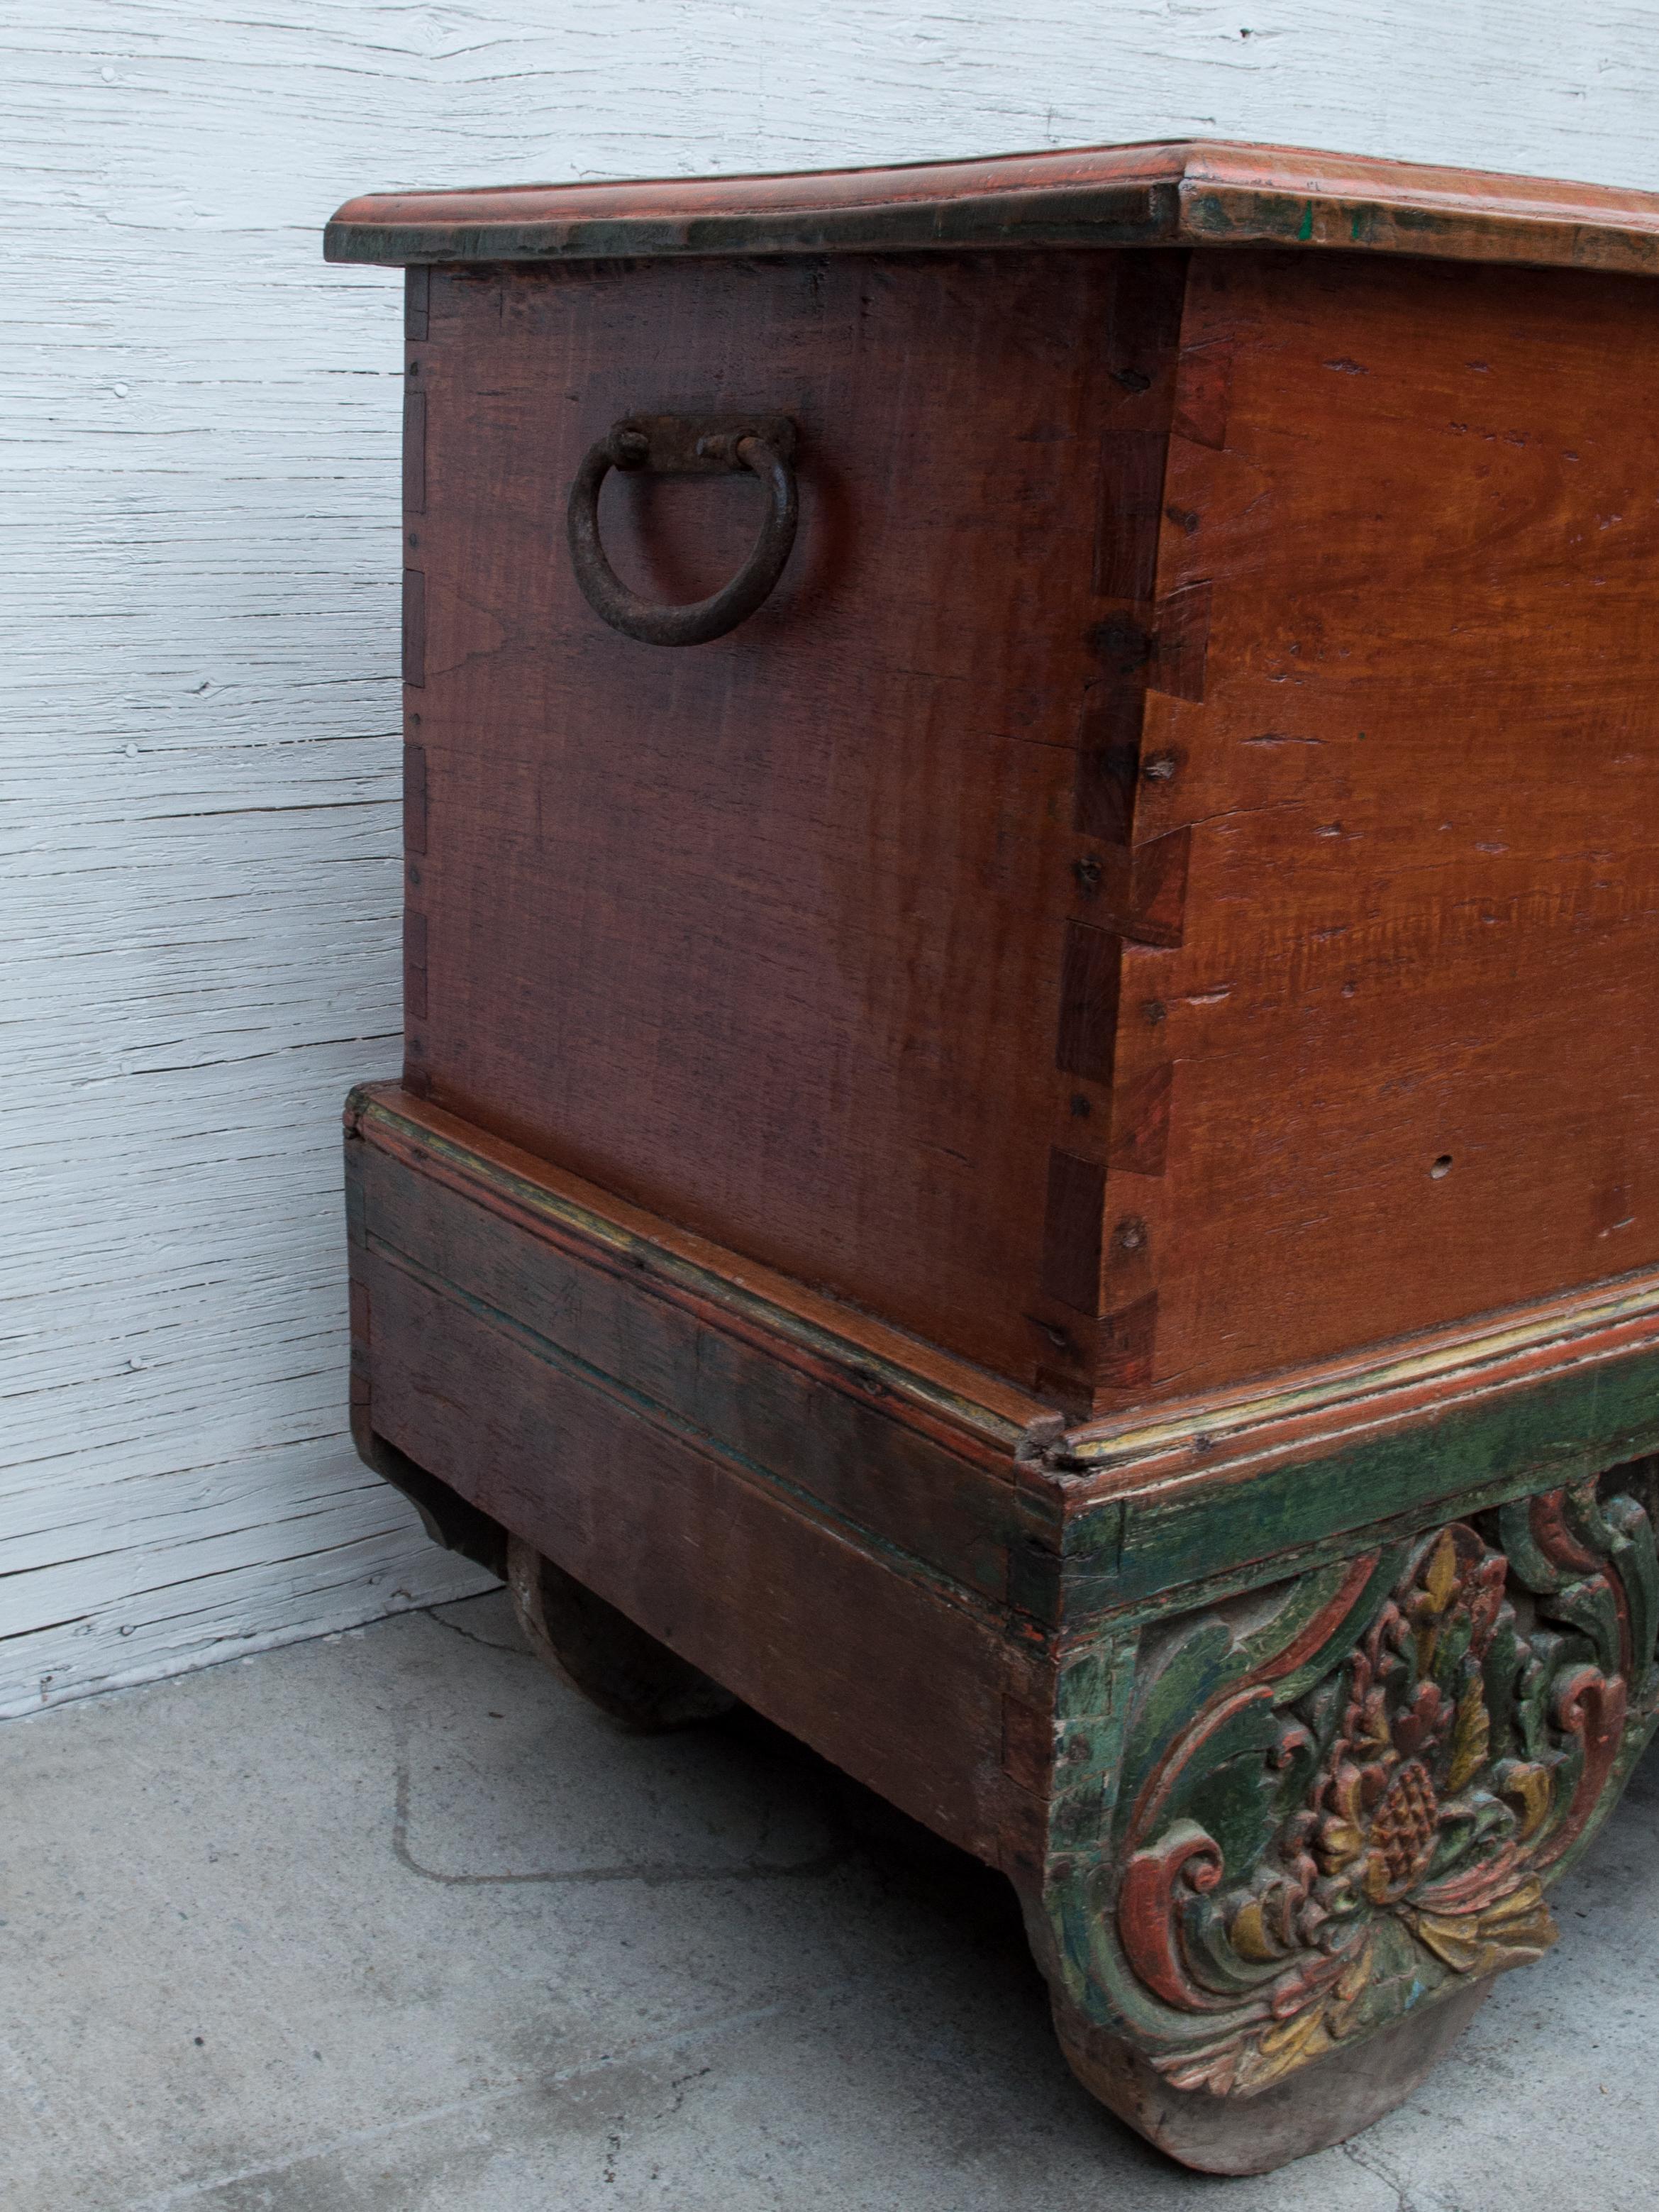 Mid-20th Century Teak Chest on Wheels from Java. Original Color and Hardware. 4